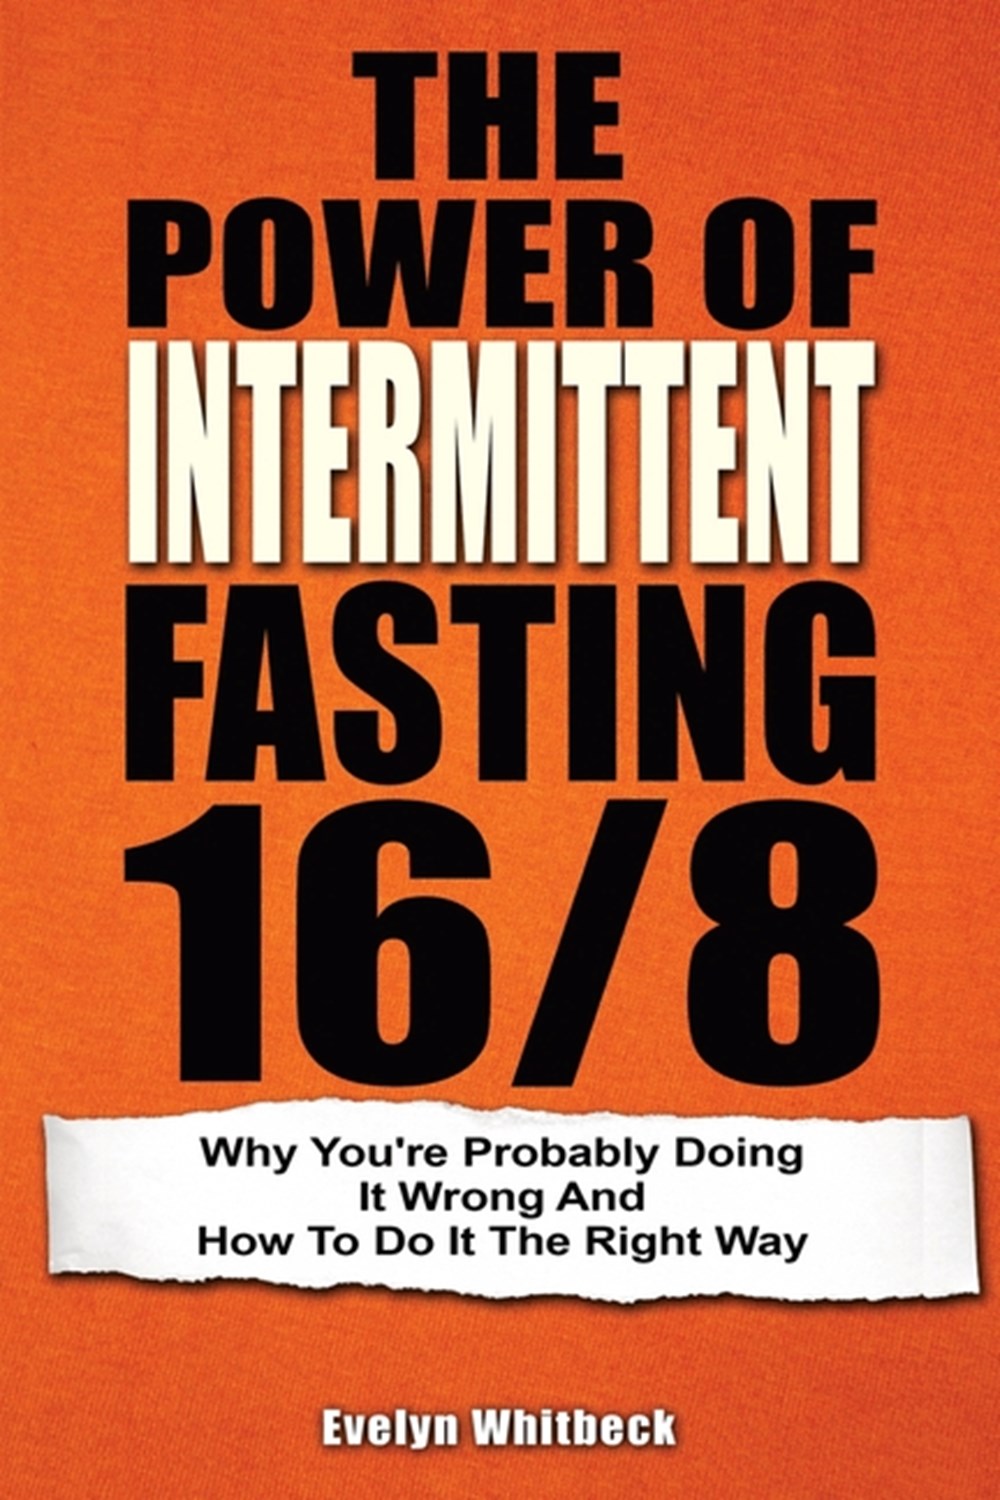 Power Of Intermittent Fasting 16/8: Why You're Probably Doing It Wrong And How To Do It The Right Wa